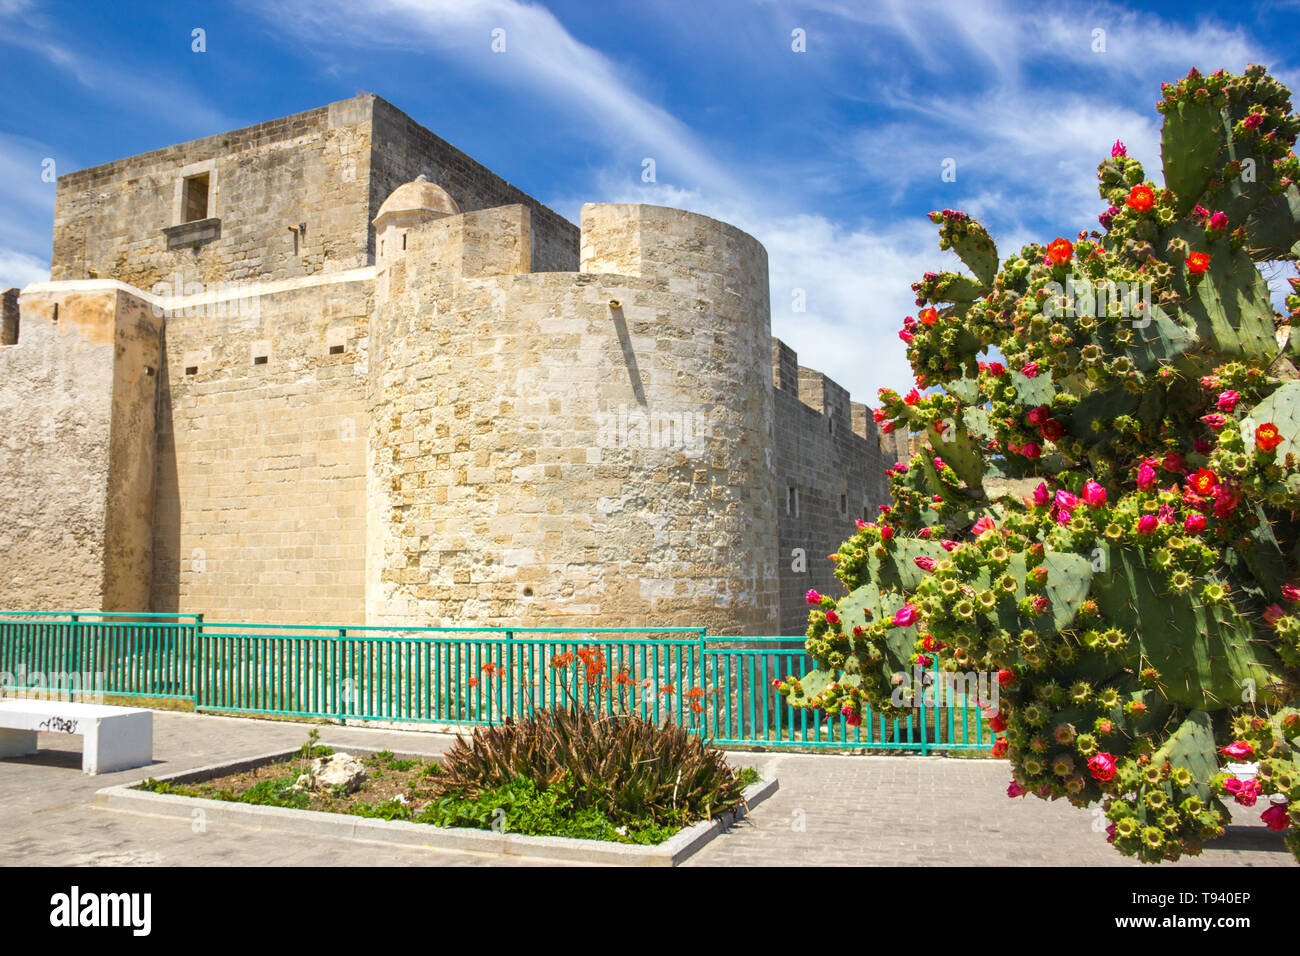 Brucoli Sicily view of old fortress near the sea with plants and flowers in the square in a sunny day Stock Photo